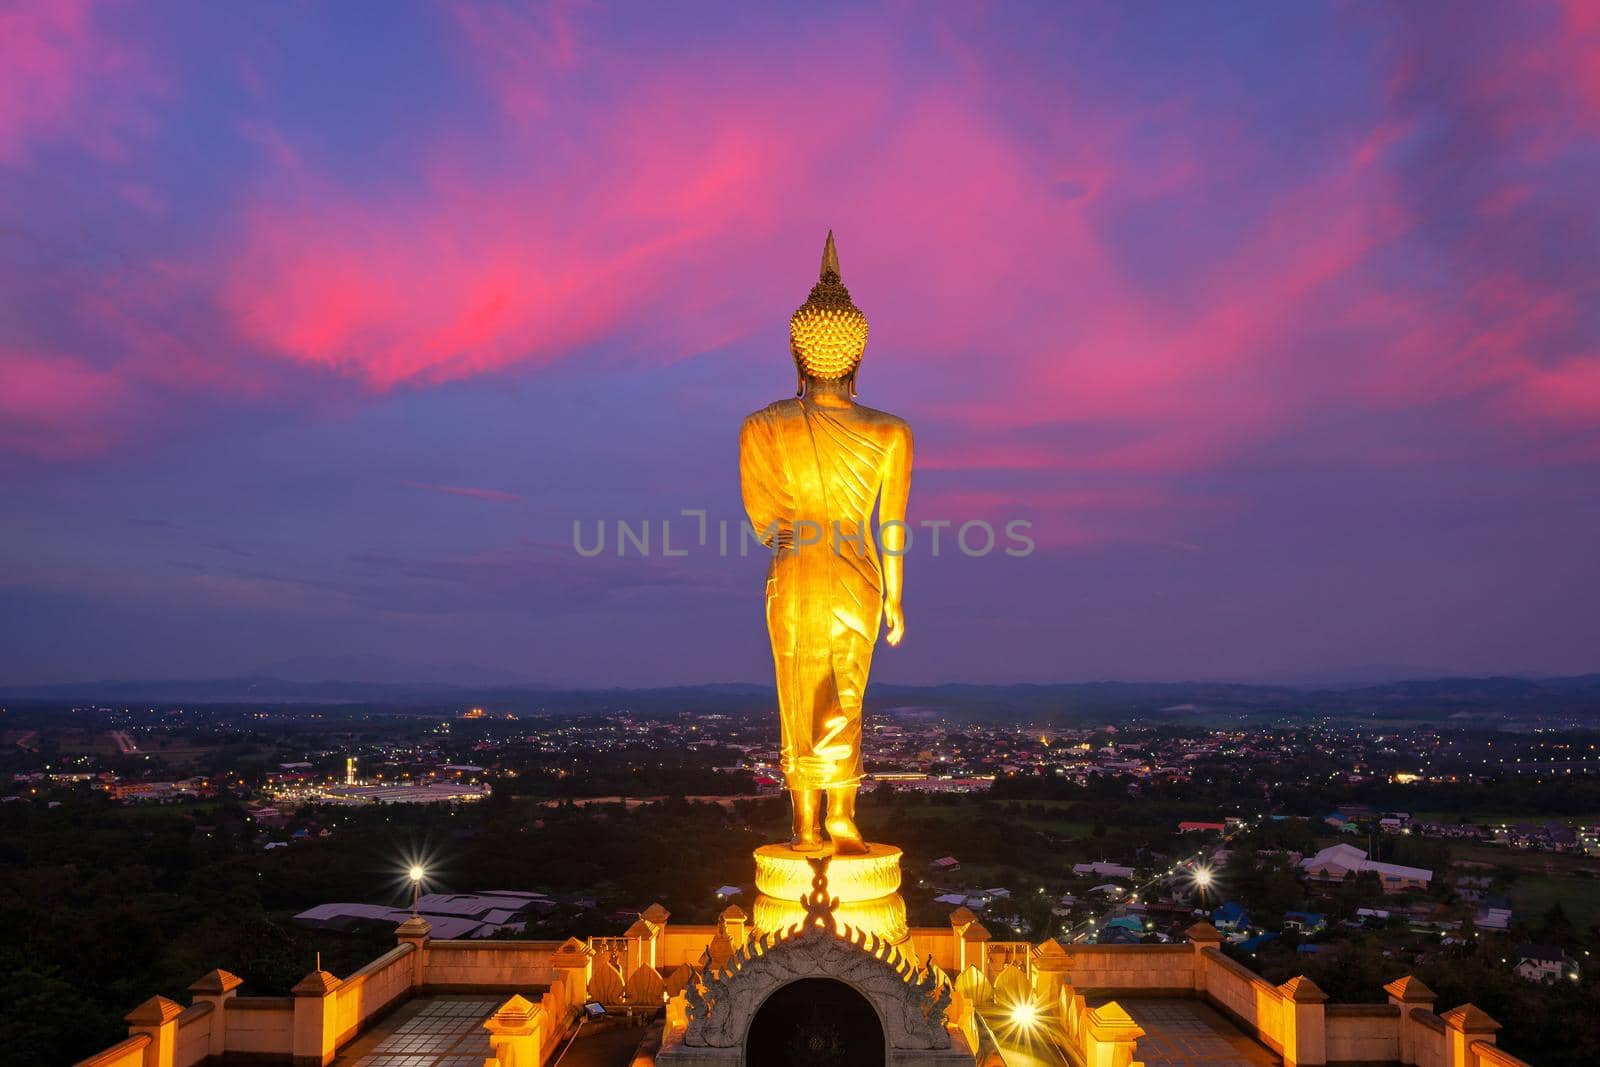 The Blessing Buddha at wat phra that khao noi during sunset at Nan province ,Thailand